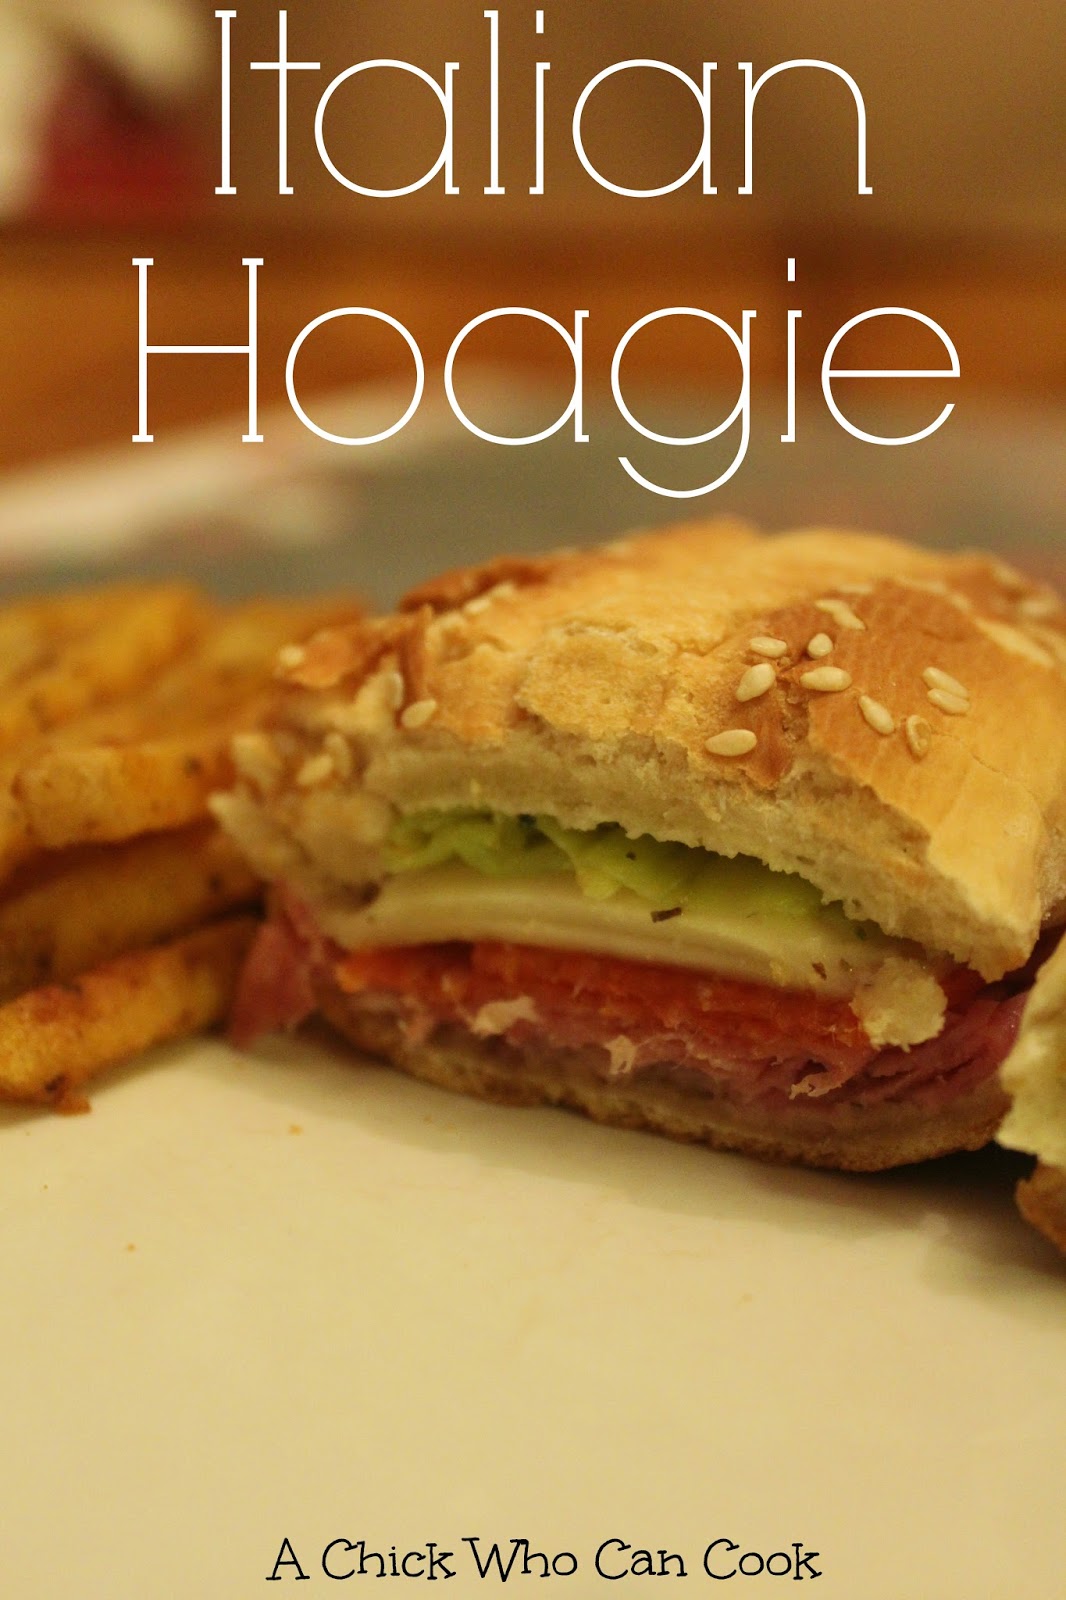 A Chick Who Can Cook: Italian Hoagie